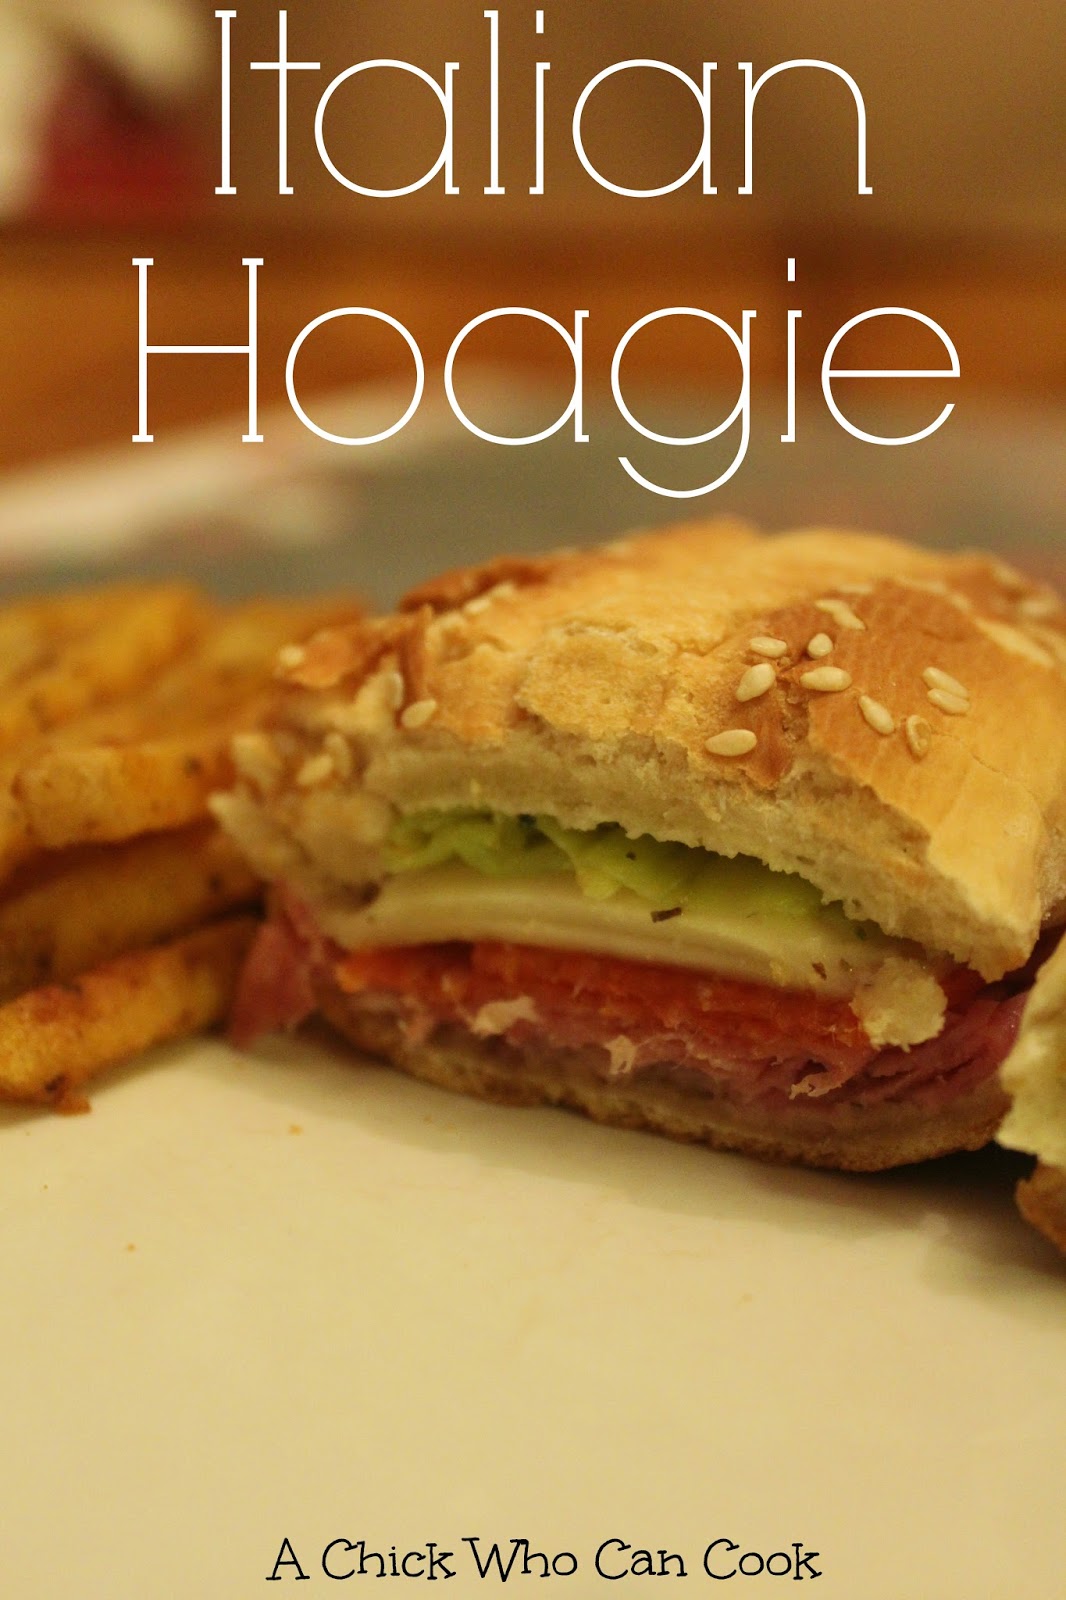 A Chick Who Can Cook: Italian Hoagie